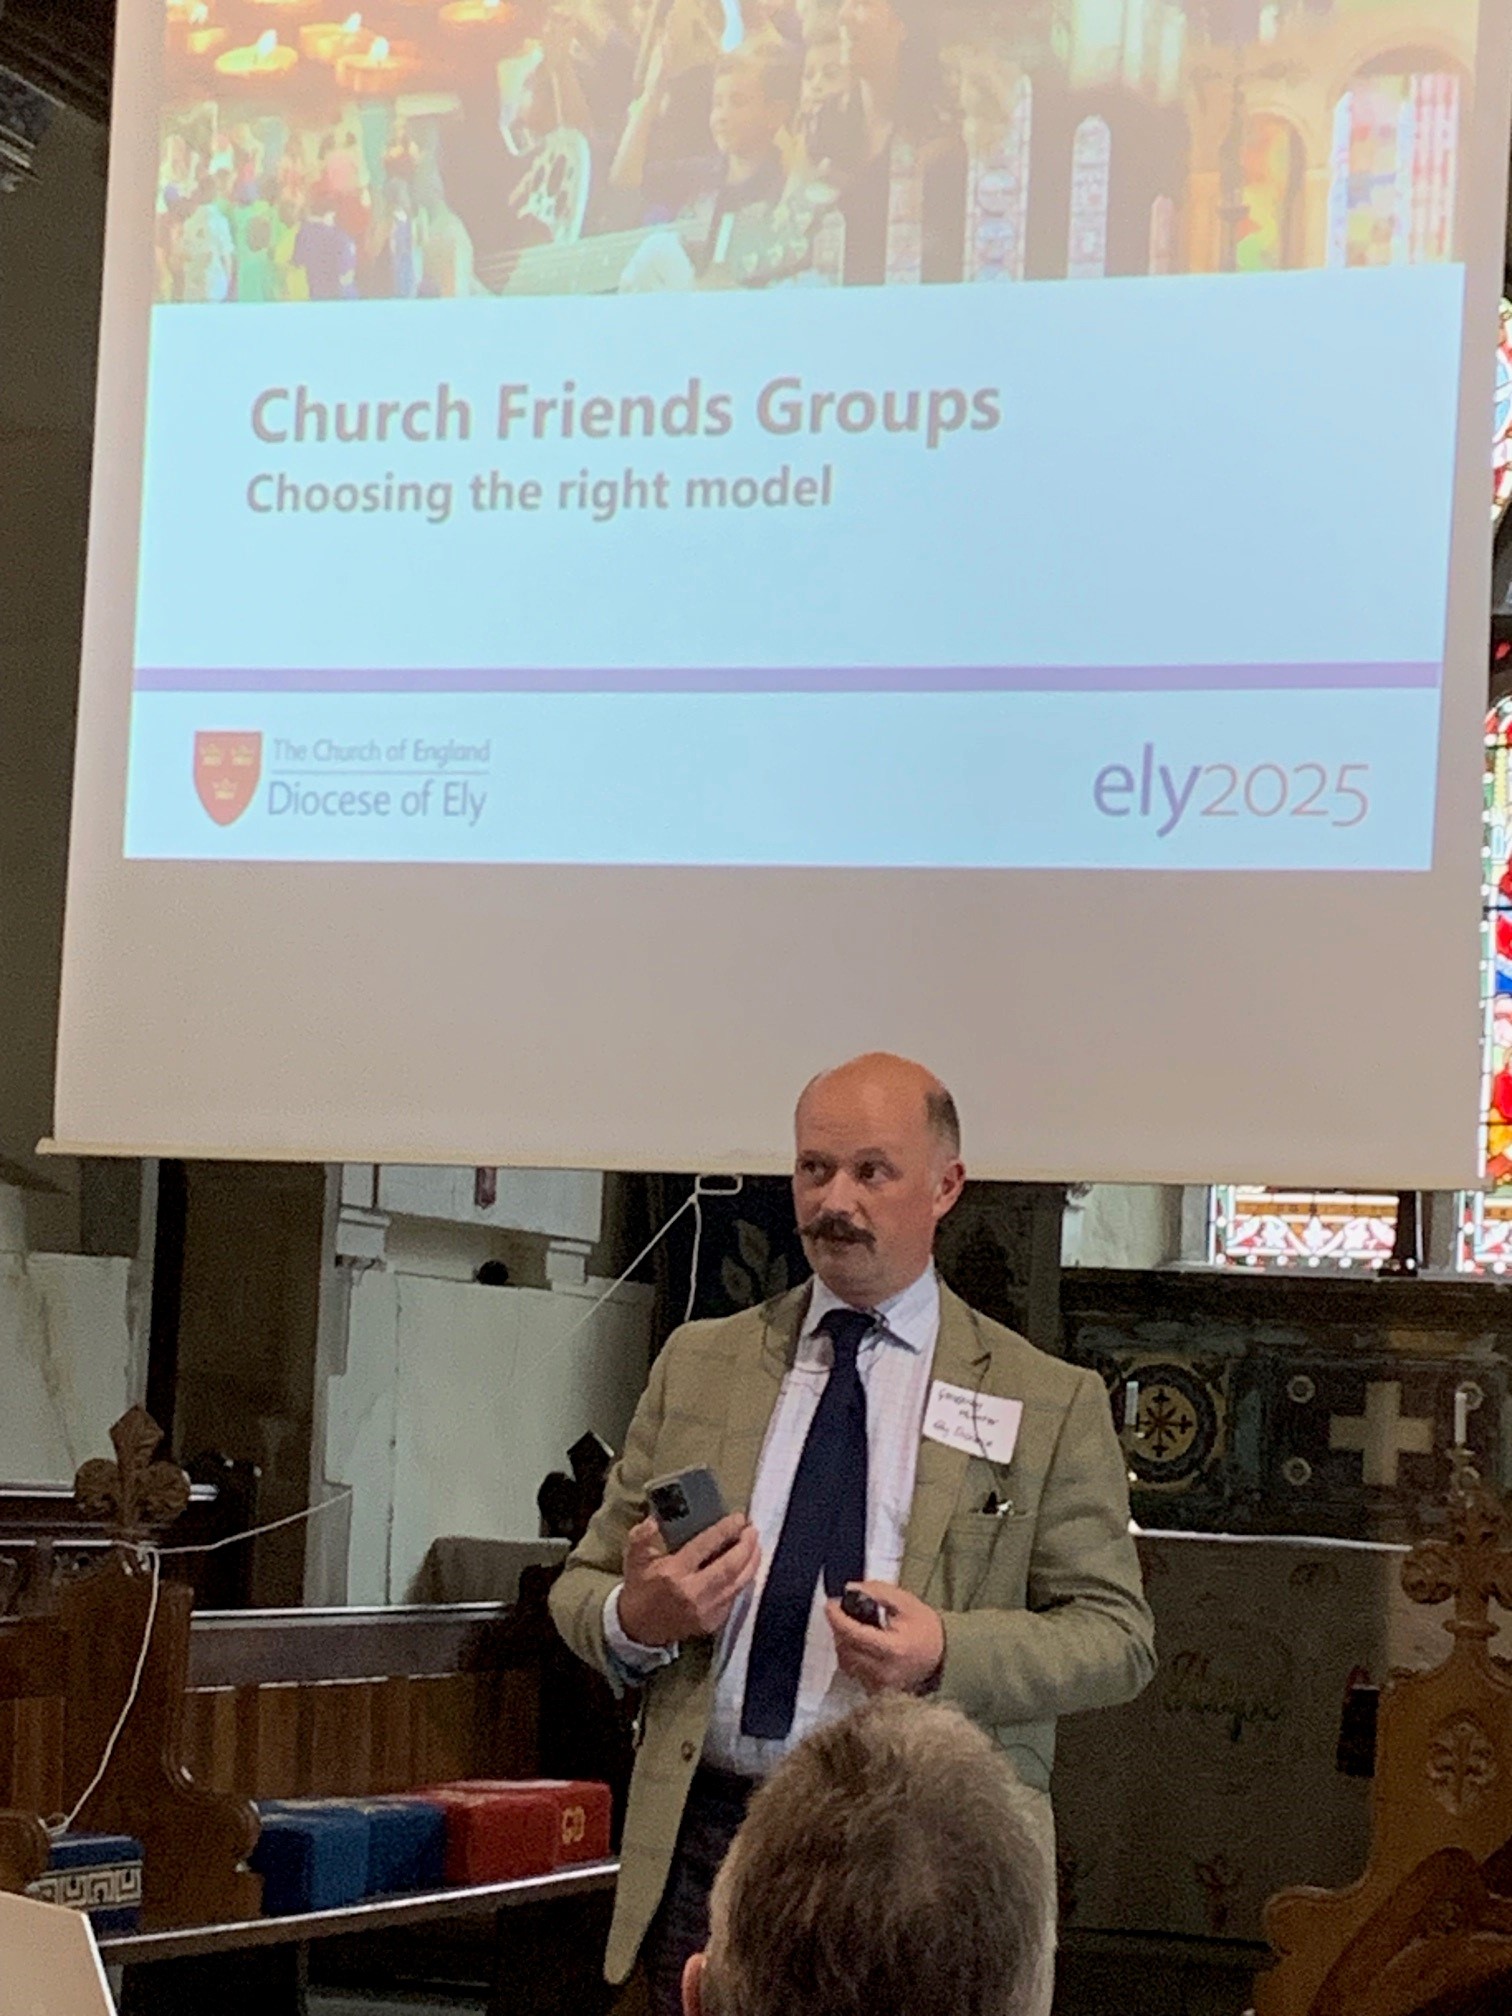 Speaker talking about Church Friends groups at the fit for function conference